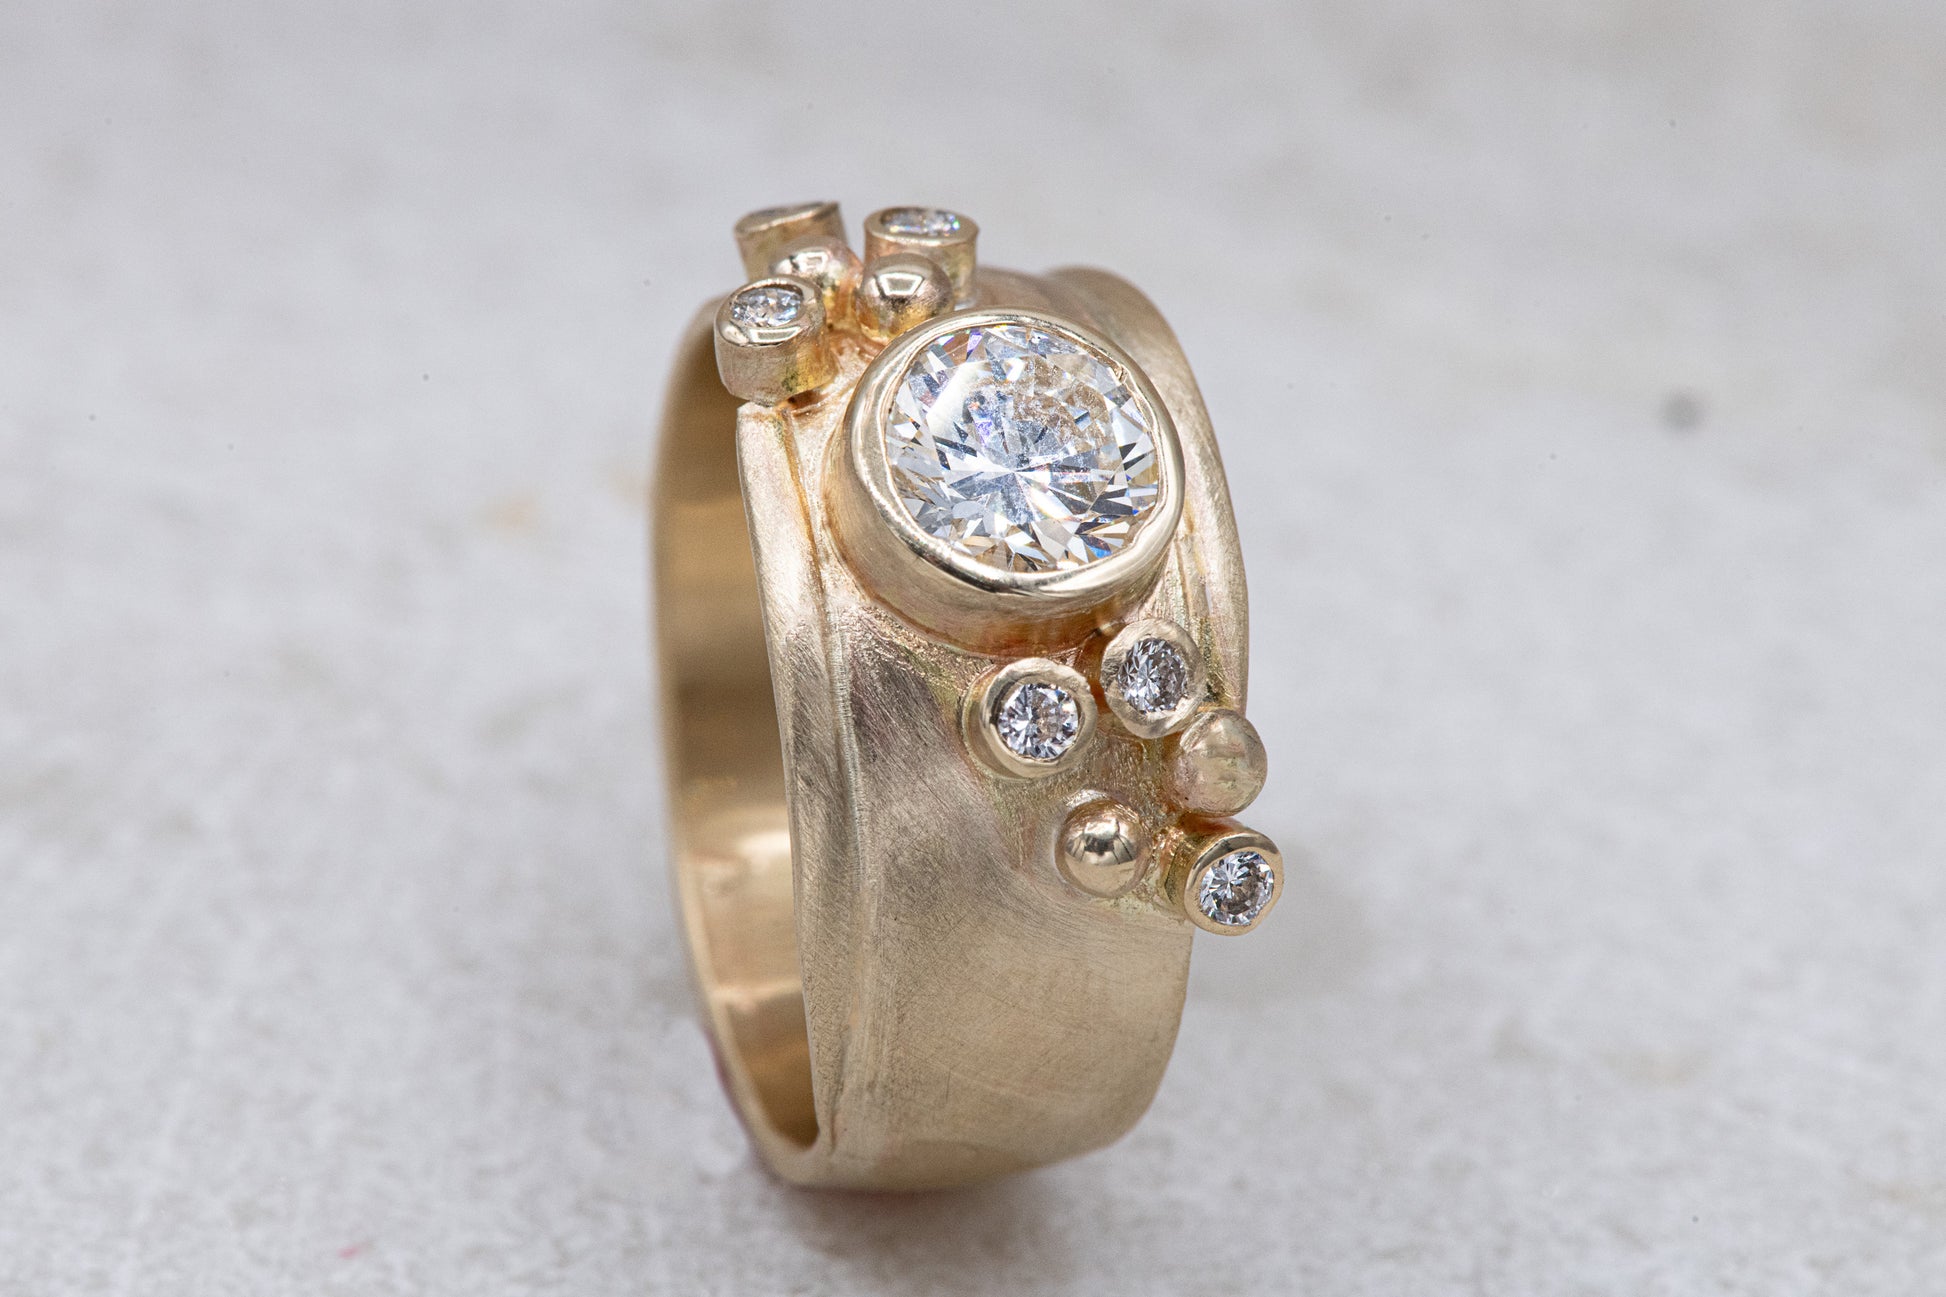 A handmade Wide Forever One Moissanite Gold Ring with a diamond in the center from Cassin Jewelry.